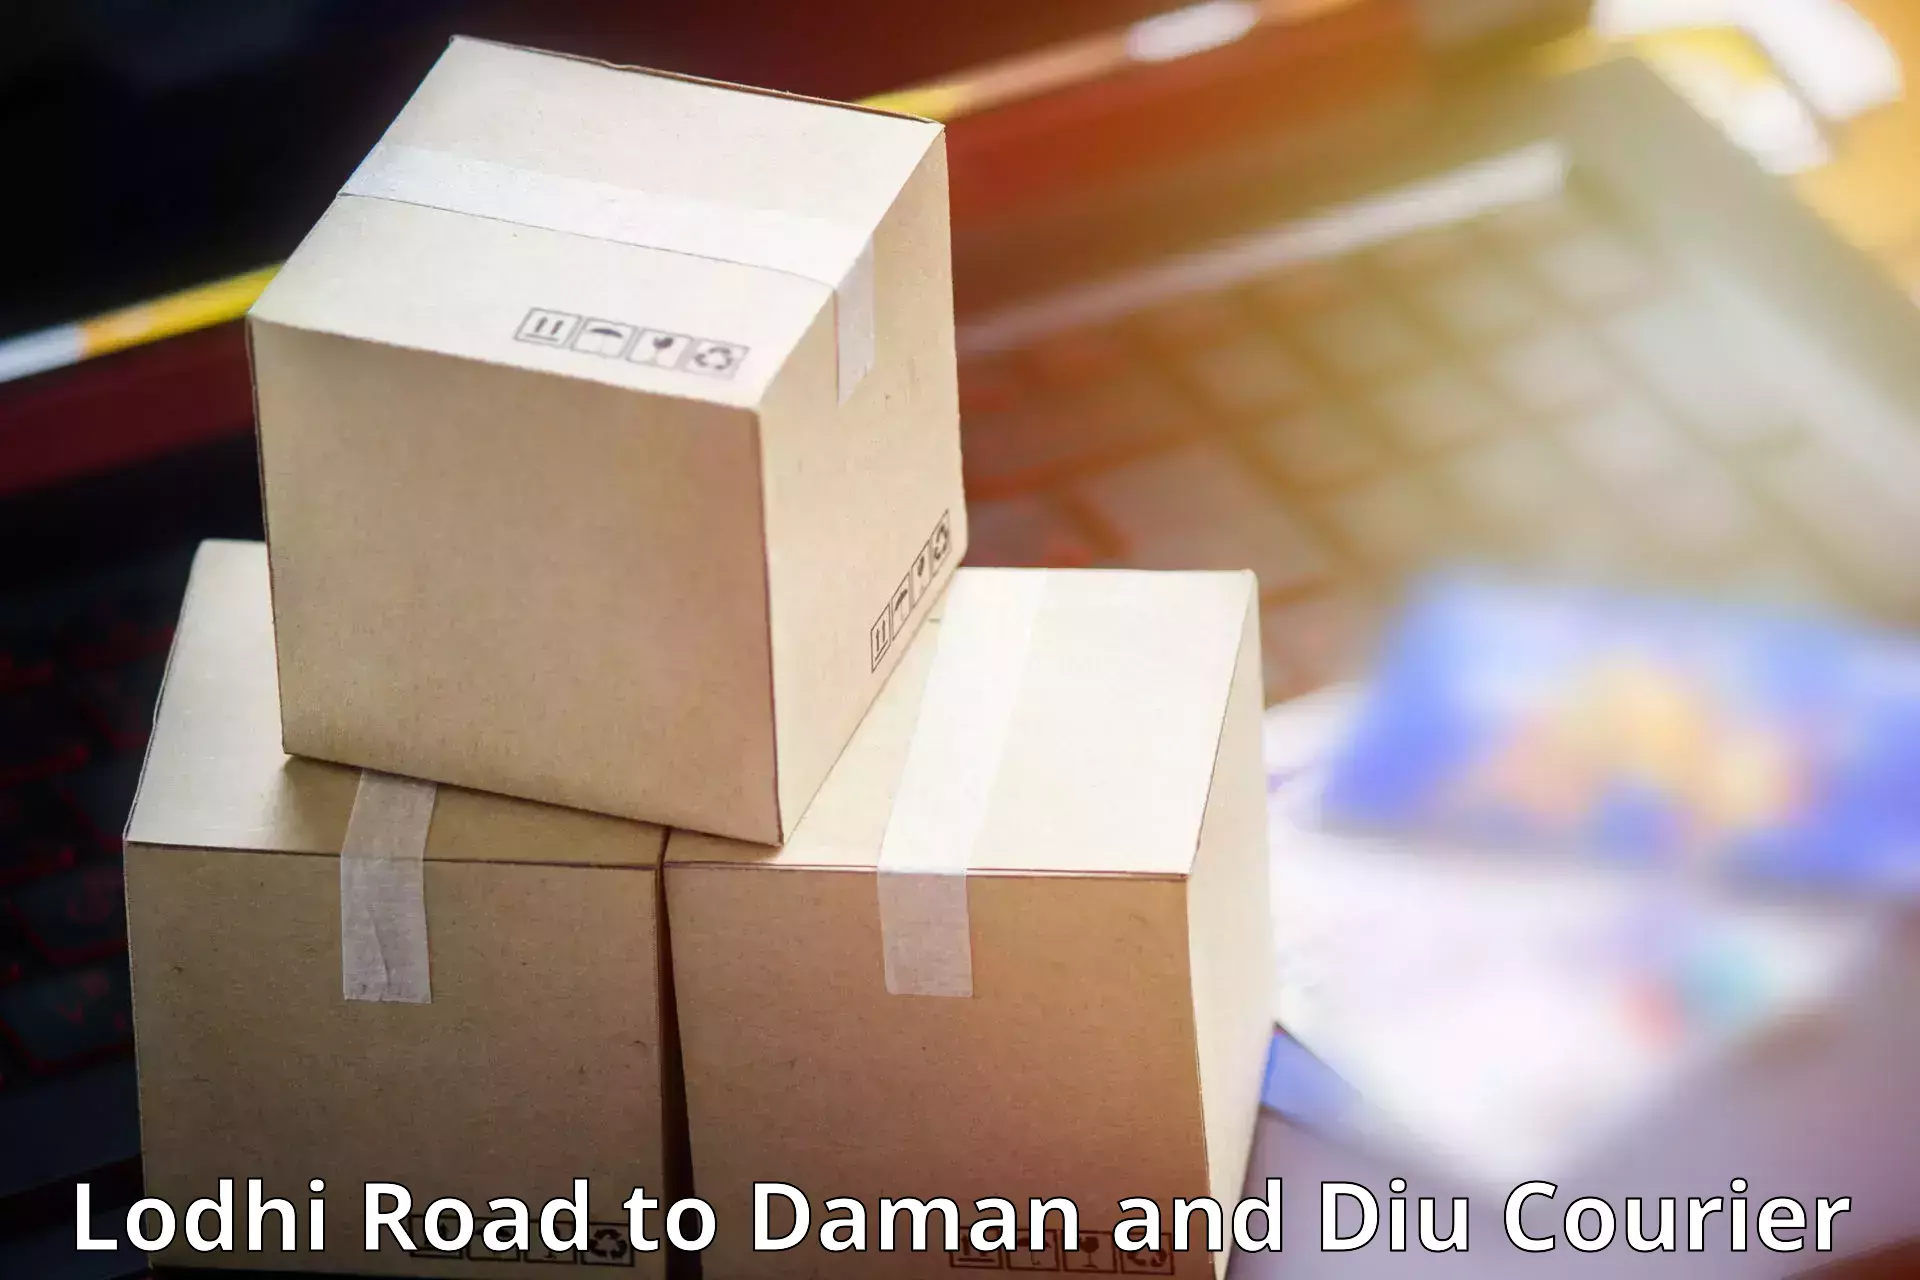 Quality courier services Lodhi Road to Daman and Diu